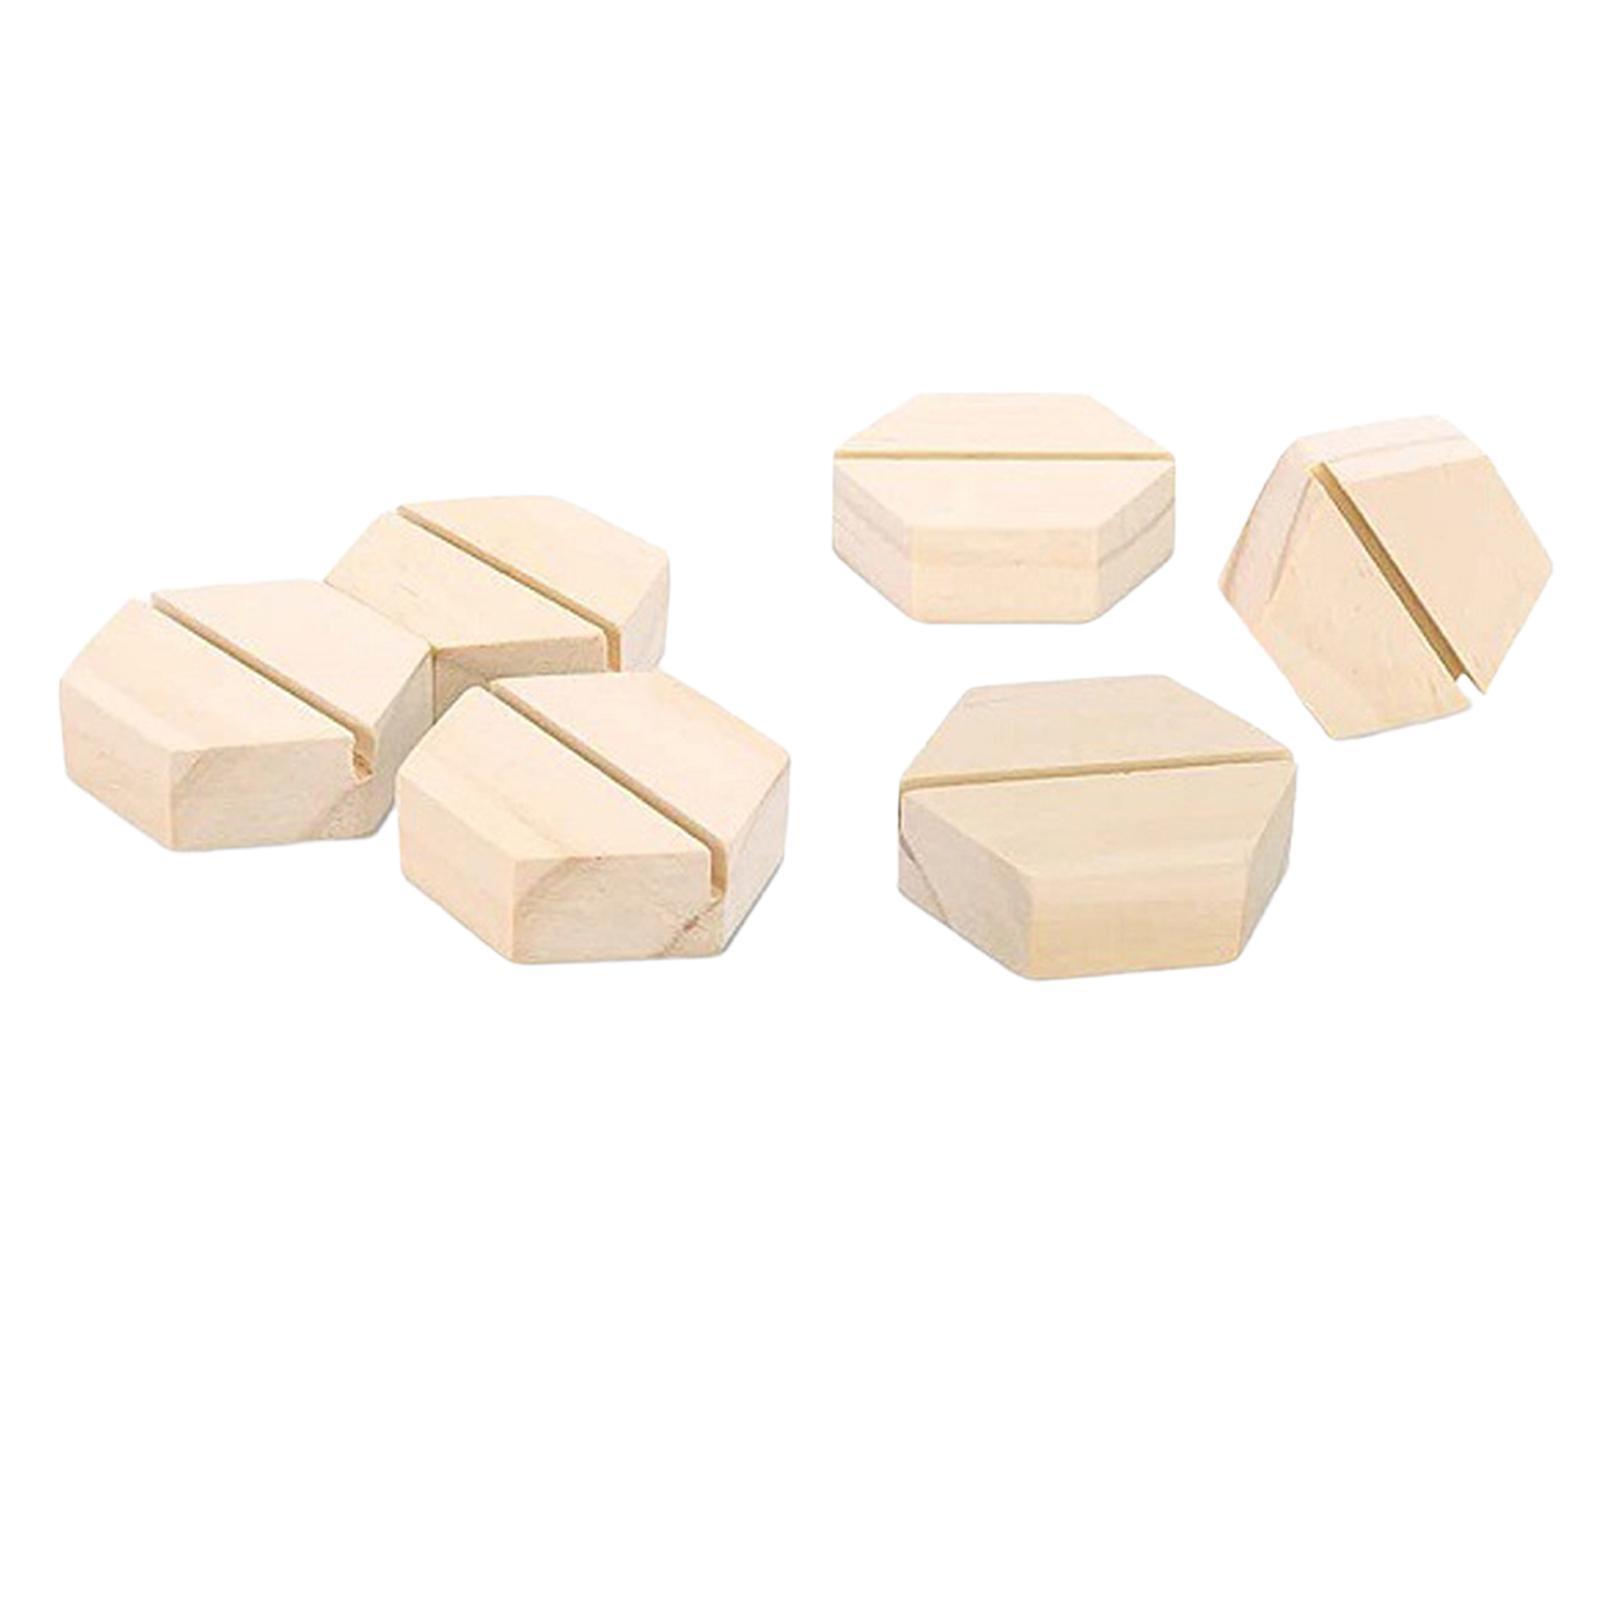 Hexagon Rustic Wooden Place Card Holders Set of 6 for Home Wedding Christmas